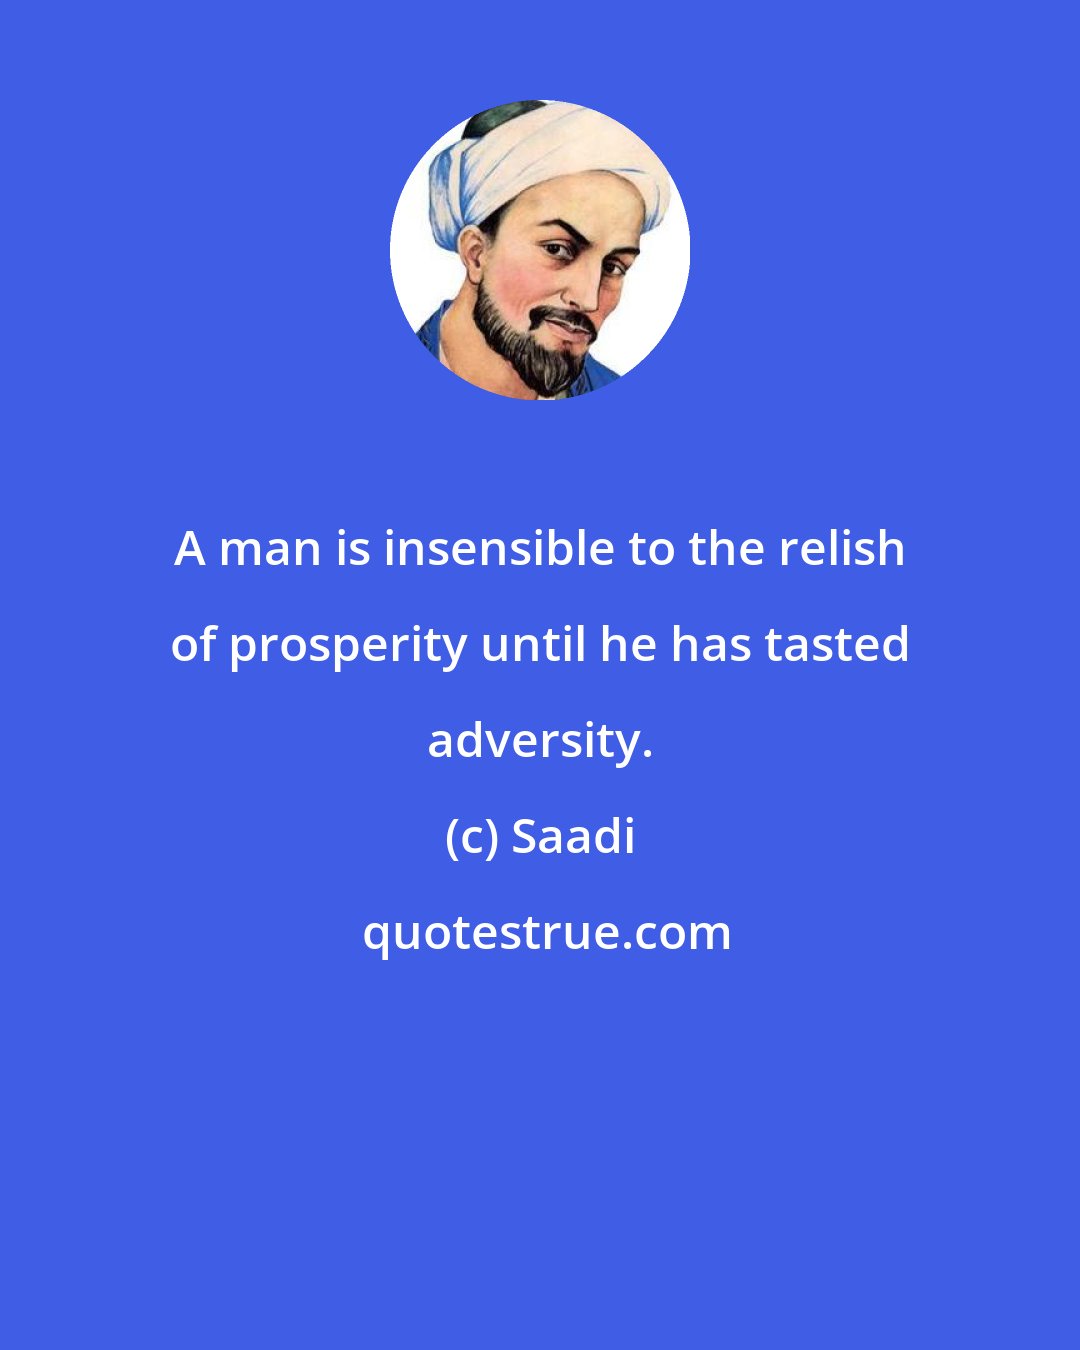 Saadi: A man is insensible to the relish of prosperity until he has tasted adversity.